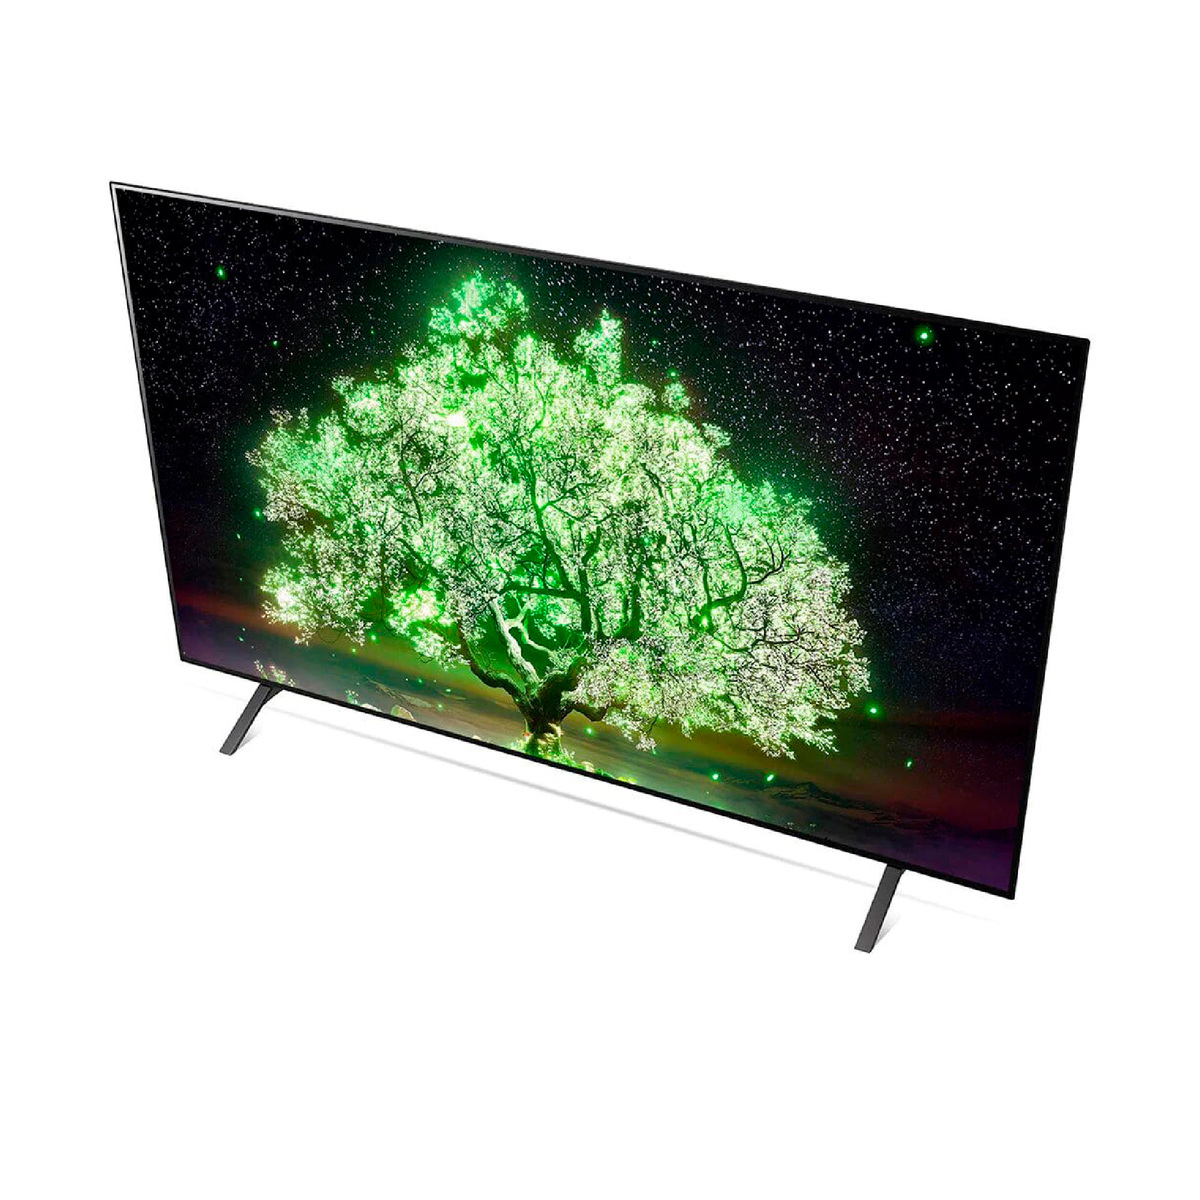 LG OLED TV 65 Inch A1 Series Cinema Screen Design New 2021 4K Cinema HDR webOS Smart with ThinQ AI Pixel Dimming